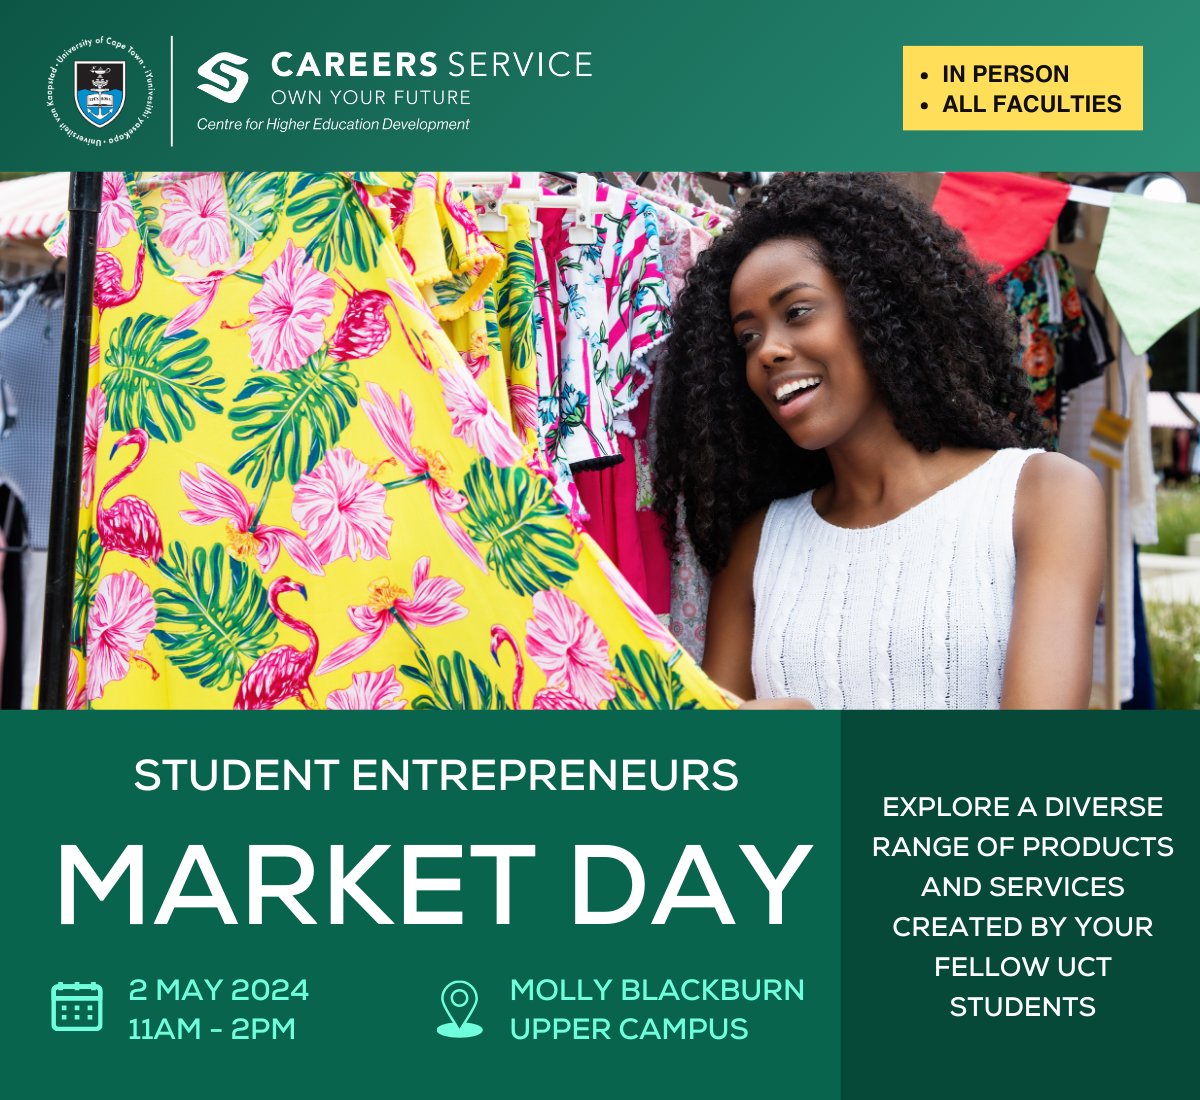 Explore a diverse range of products and services created by your fellow UCT students THIS THURSDAY, 2 May 2024 at Students Entrepreneurs Market Day. Visit all the stands in Molly Blackburn Foyer from 11am - 2pm. See you there!